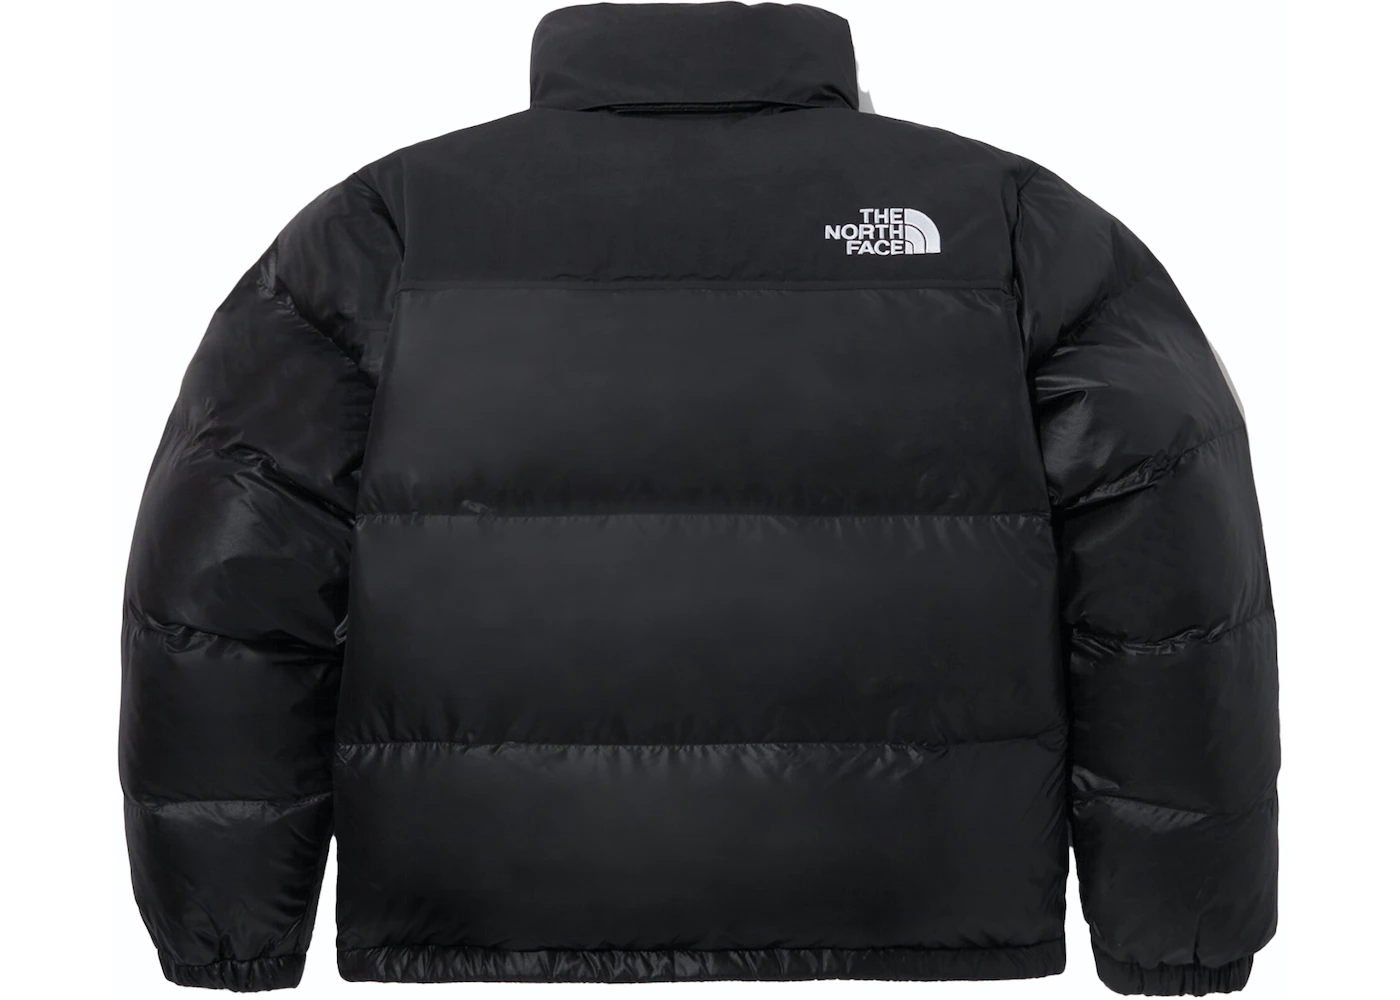 The North Face Nuptse On Ball Jacket Real Black Men's - FW23 - US